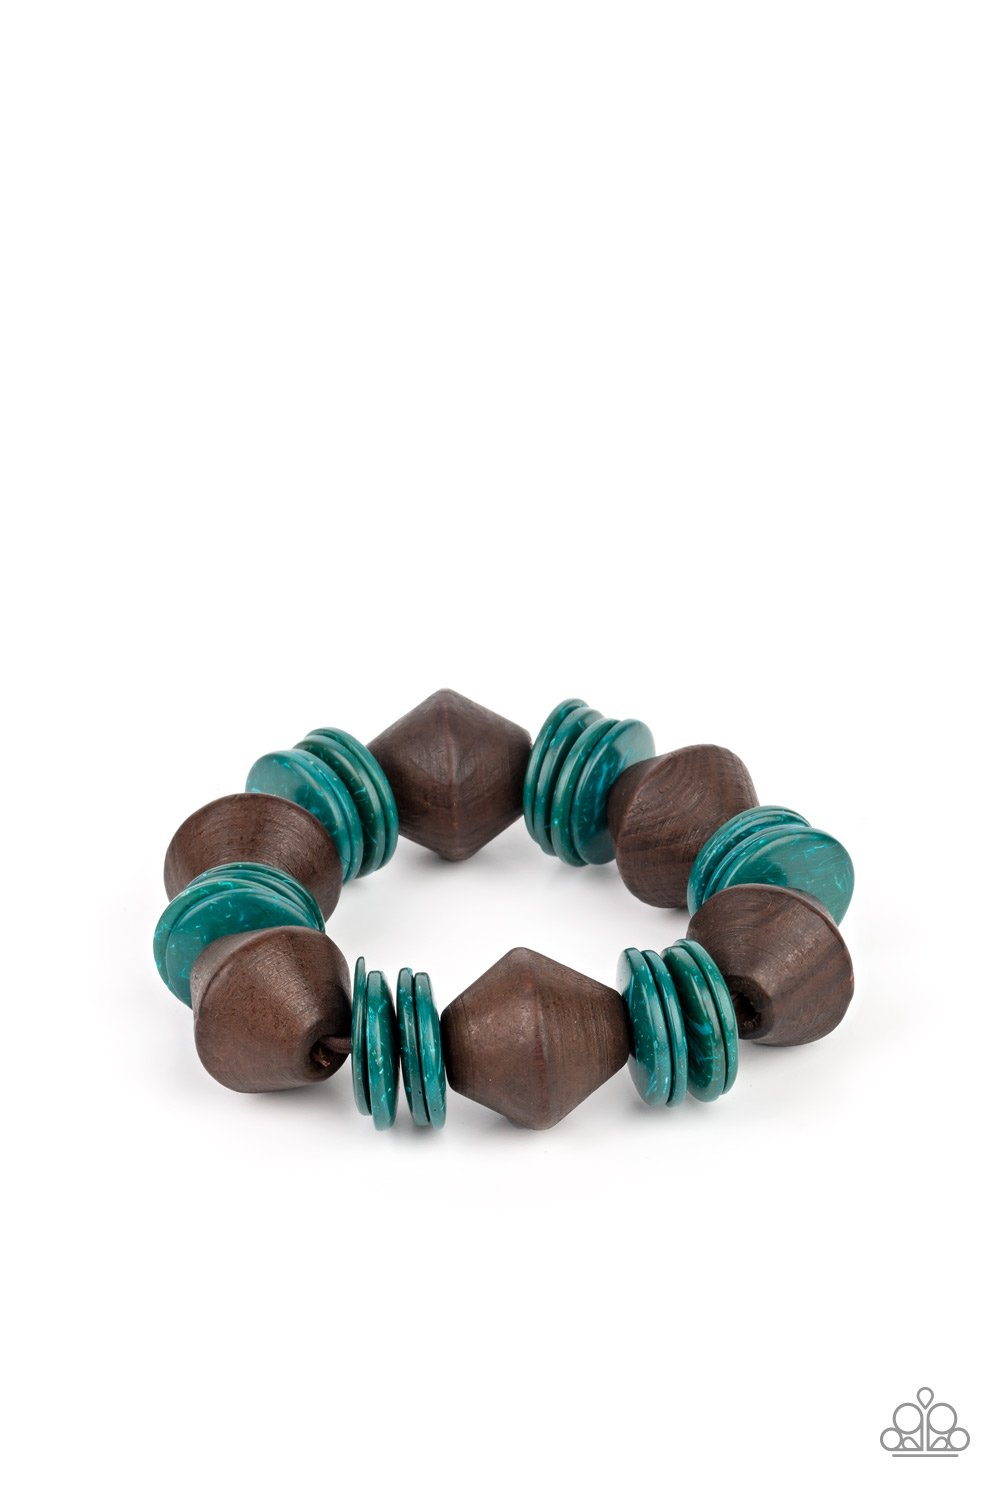 &lt;p&gt;Blue wooden discs and chunky brown wooden beads are threaded along a stretchy band around the wrist, creating a summery look. &lt;/p&gt;

&lt;p&gt;&lt;i&gt; Sold as one individual bracelet. &lt;/i&gt;&lt;/p&gt;


&lt;img src=\&quot;https://d9b54x484lq62.cloudfront.net/paparazzi/shopping/images/517_tag150x115_1.png\&quot; alt=\&quot;New Kit\&quot; align=\&quot;middle\&quot; height=\&quot;50\&quot; width=\&quot;50\&quot;&gt;